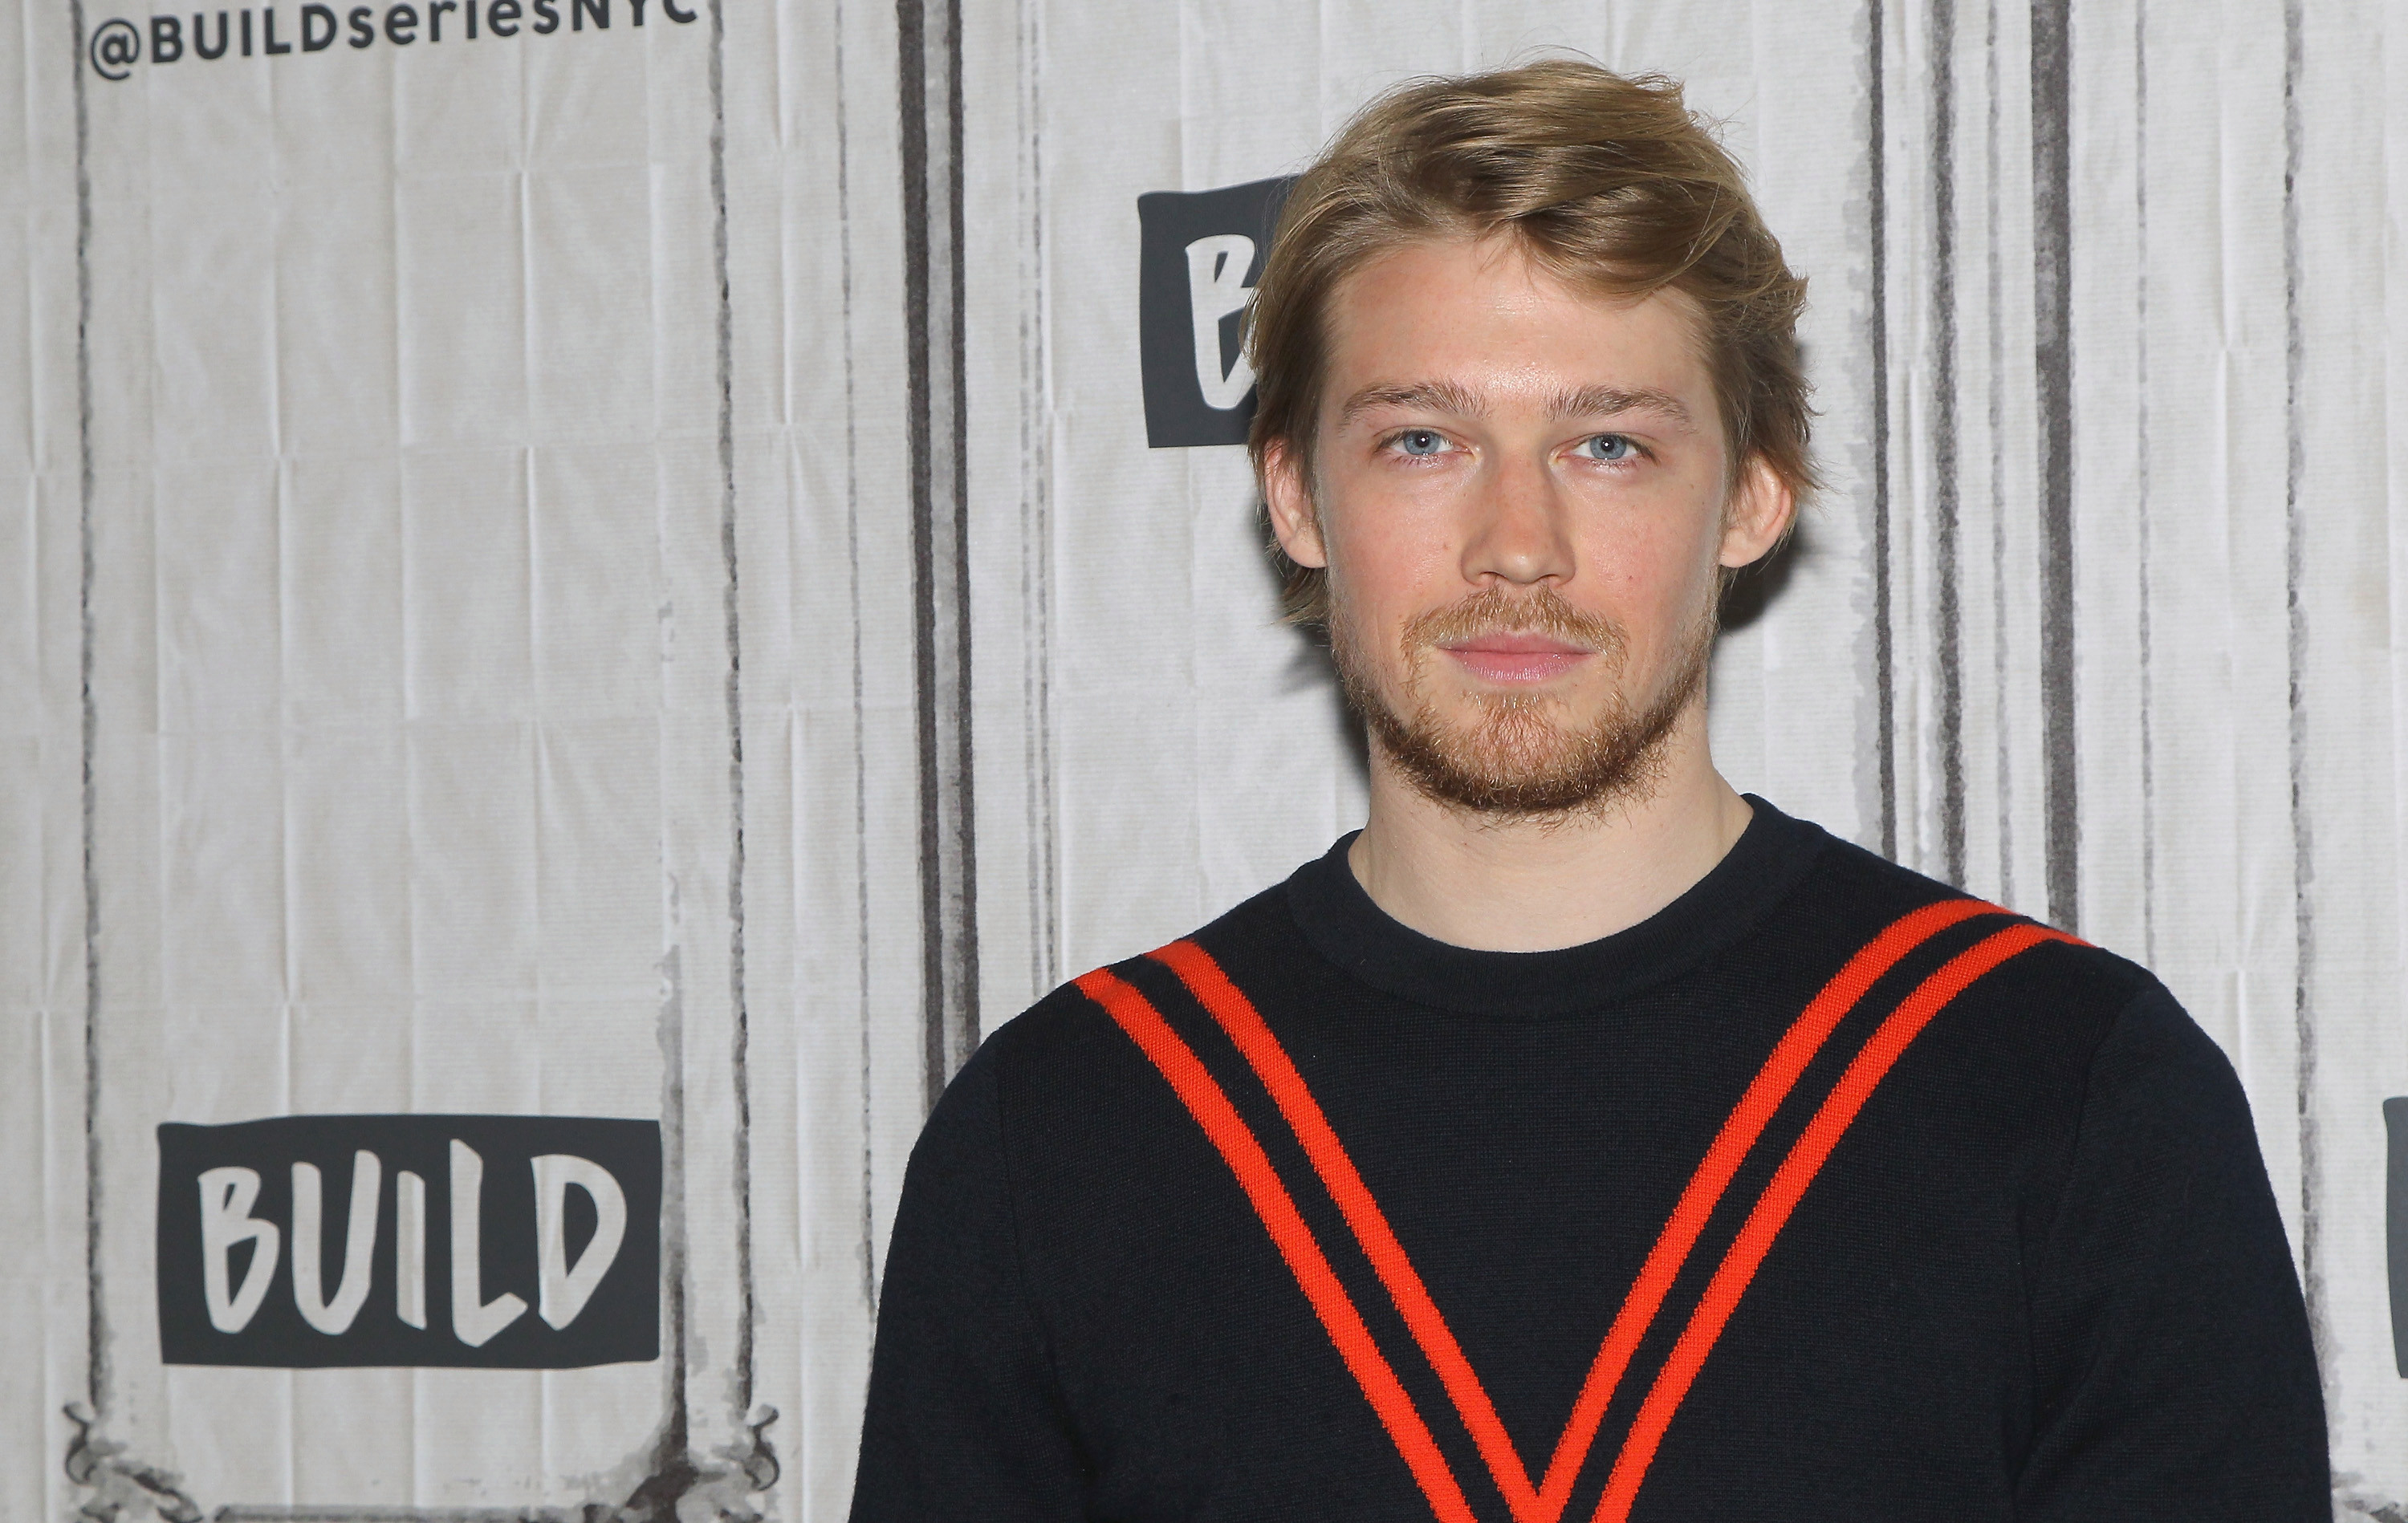 BBC’s Conversations With Friends casts Joe Alwyn and Jemima Kirke after Normal People success